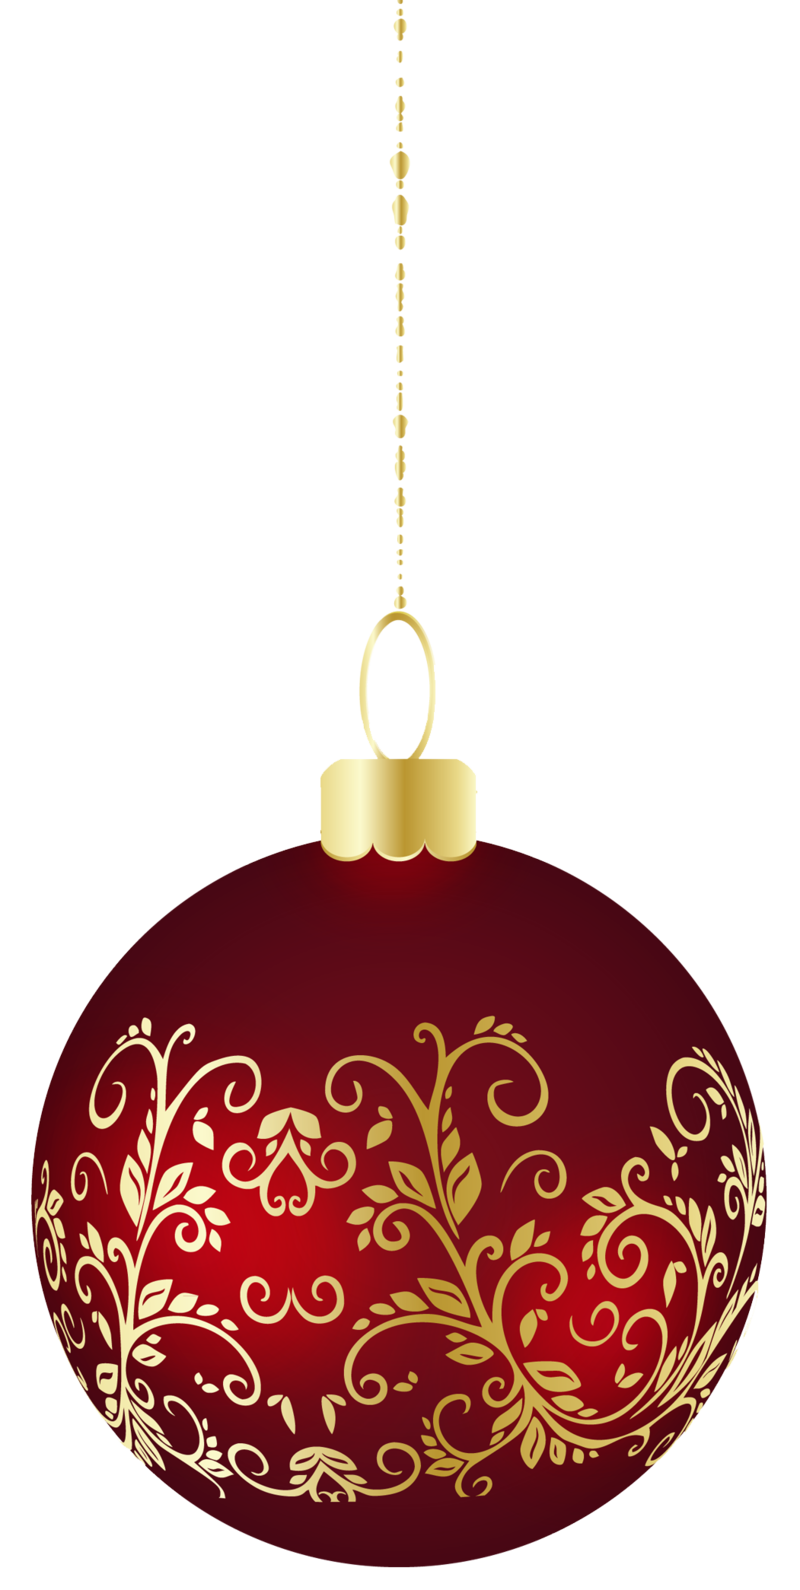 Large_Transparent_Christmas_Ball_Ornament_PNG_Clipart.png